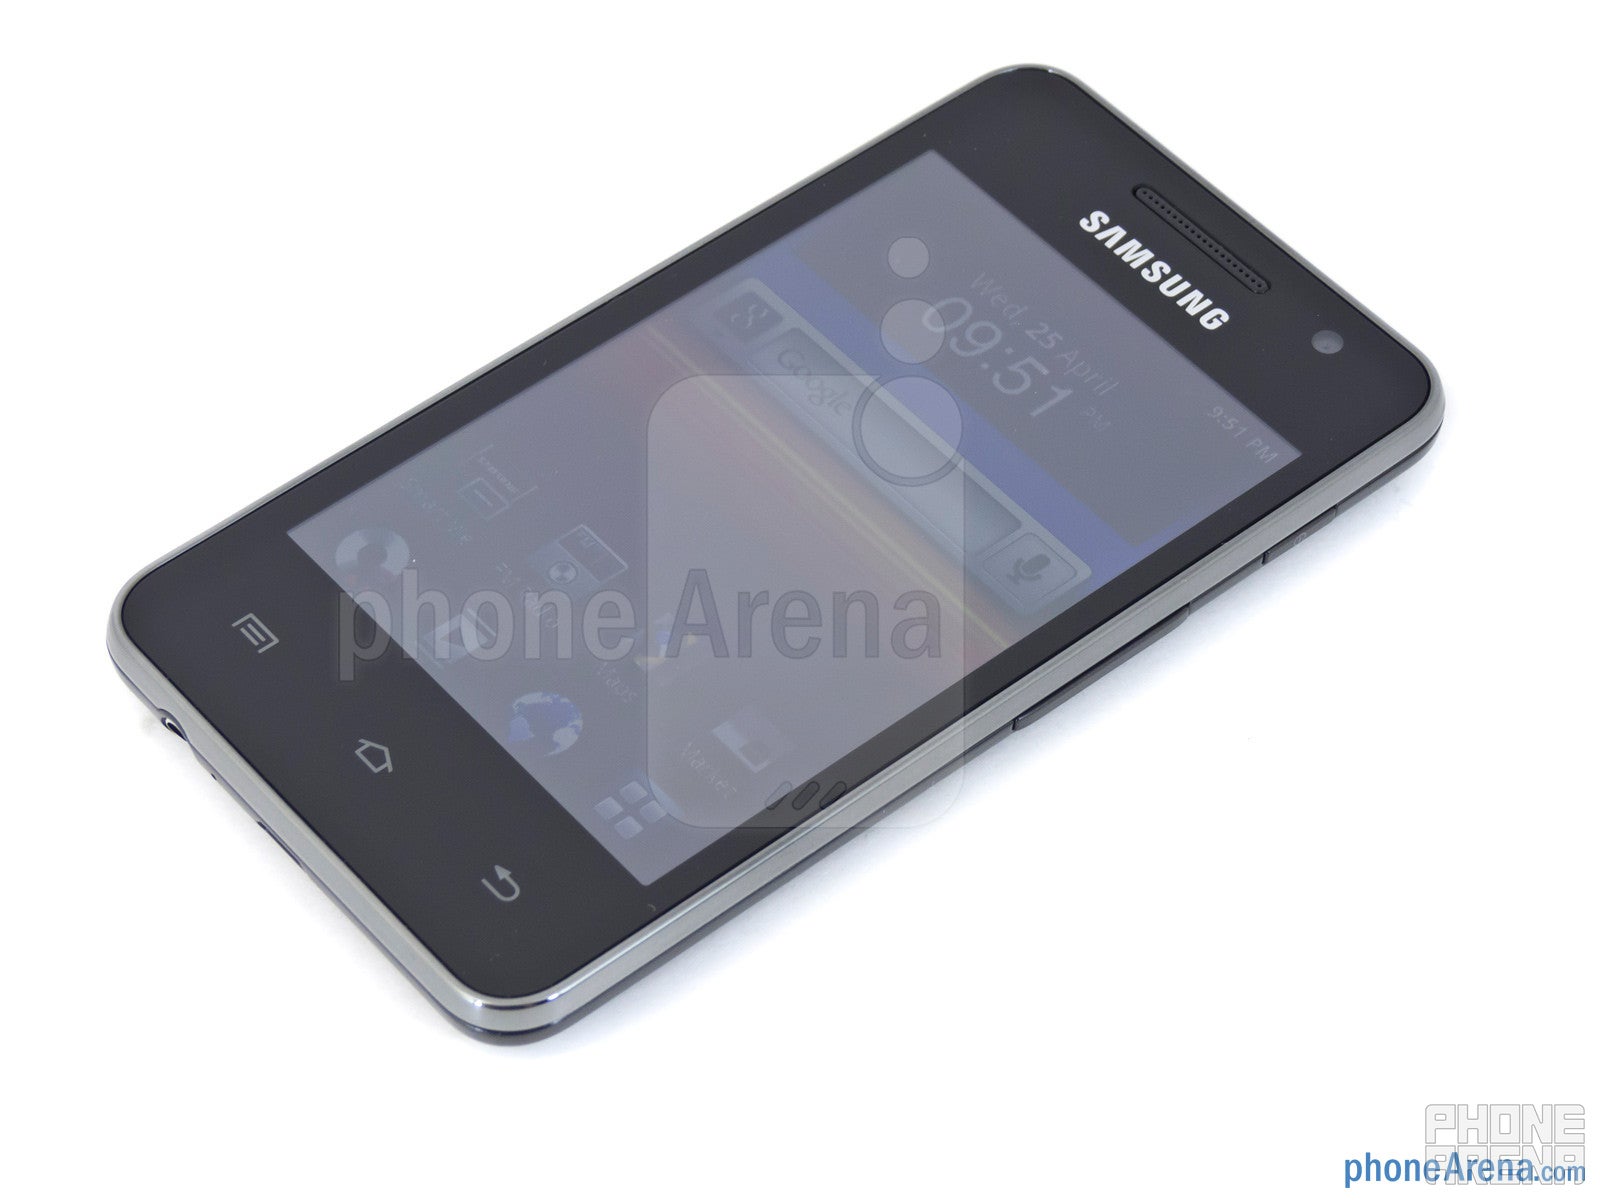 Samsung Galaxy Player 3.6 Review